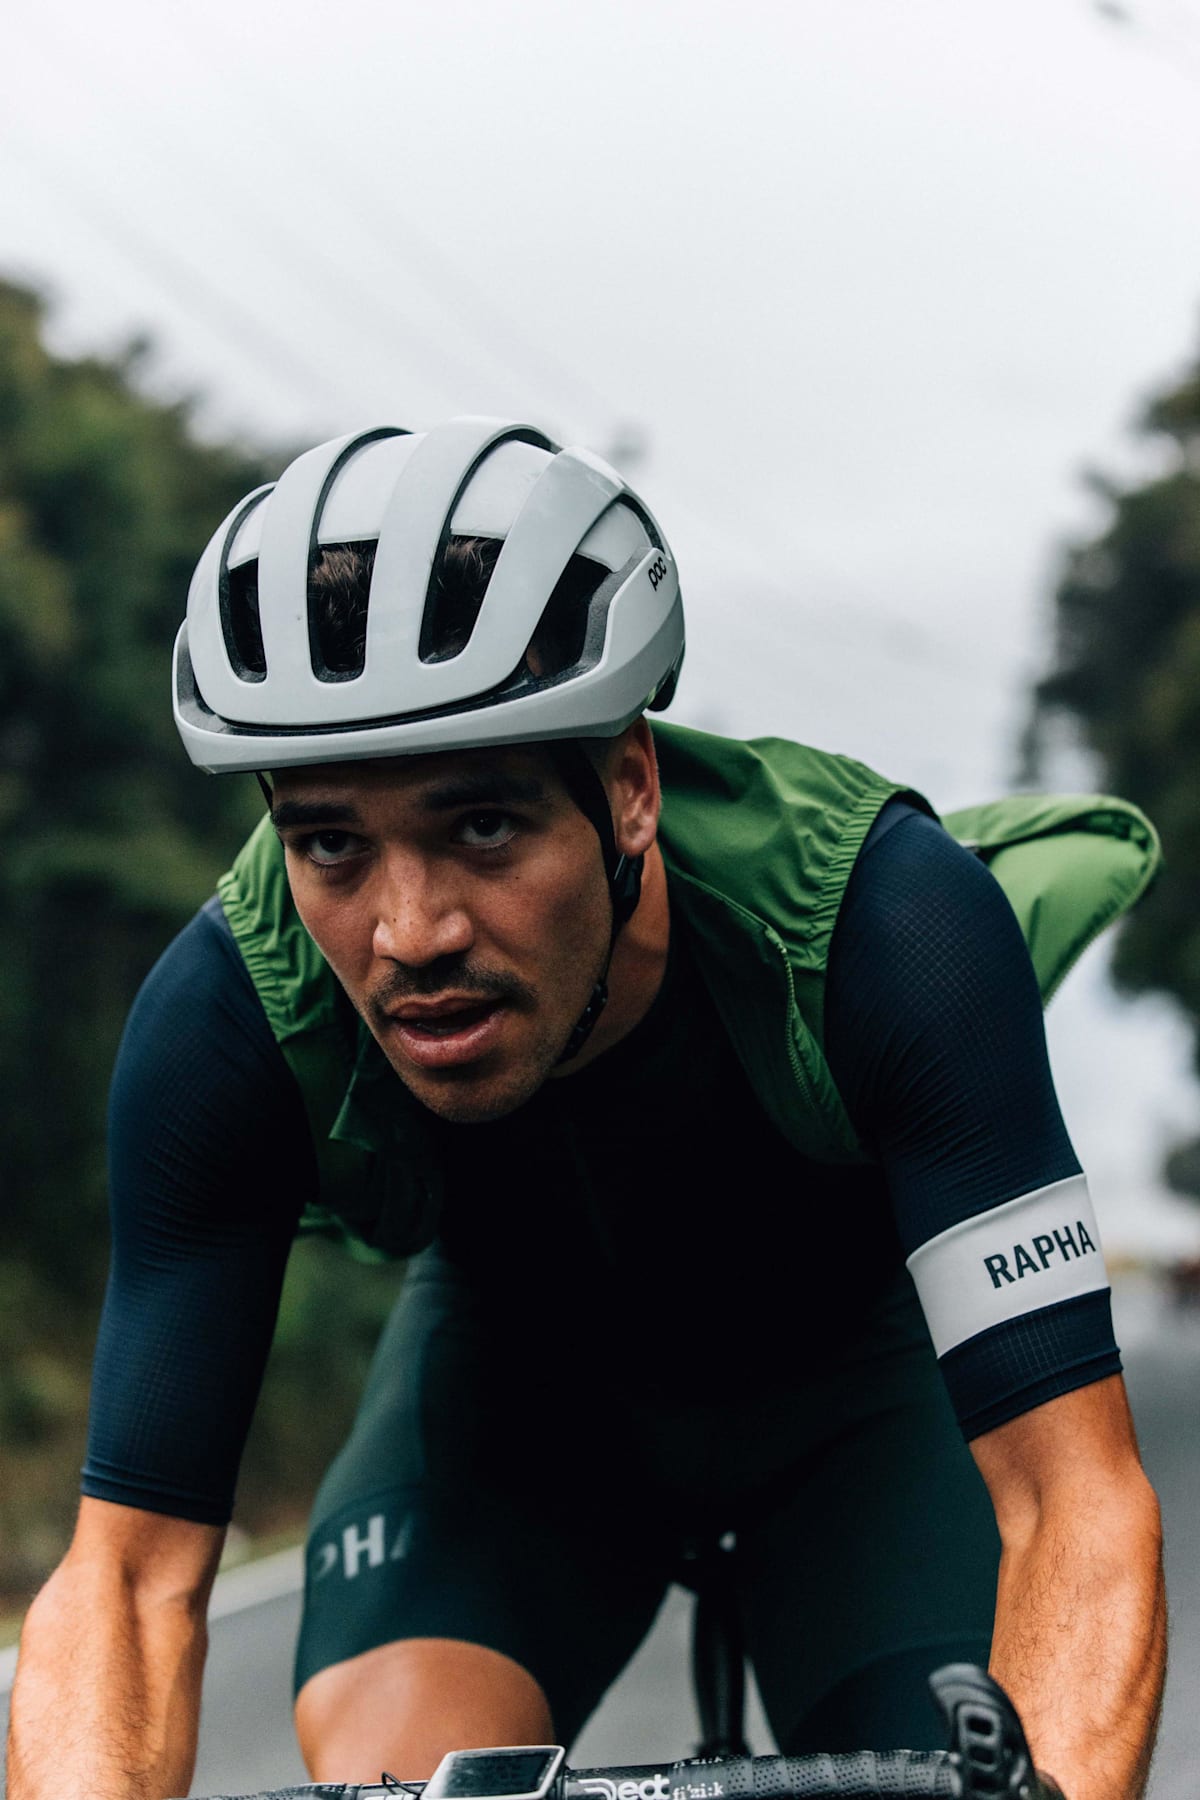 Cycling Jackets for Summer